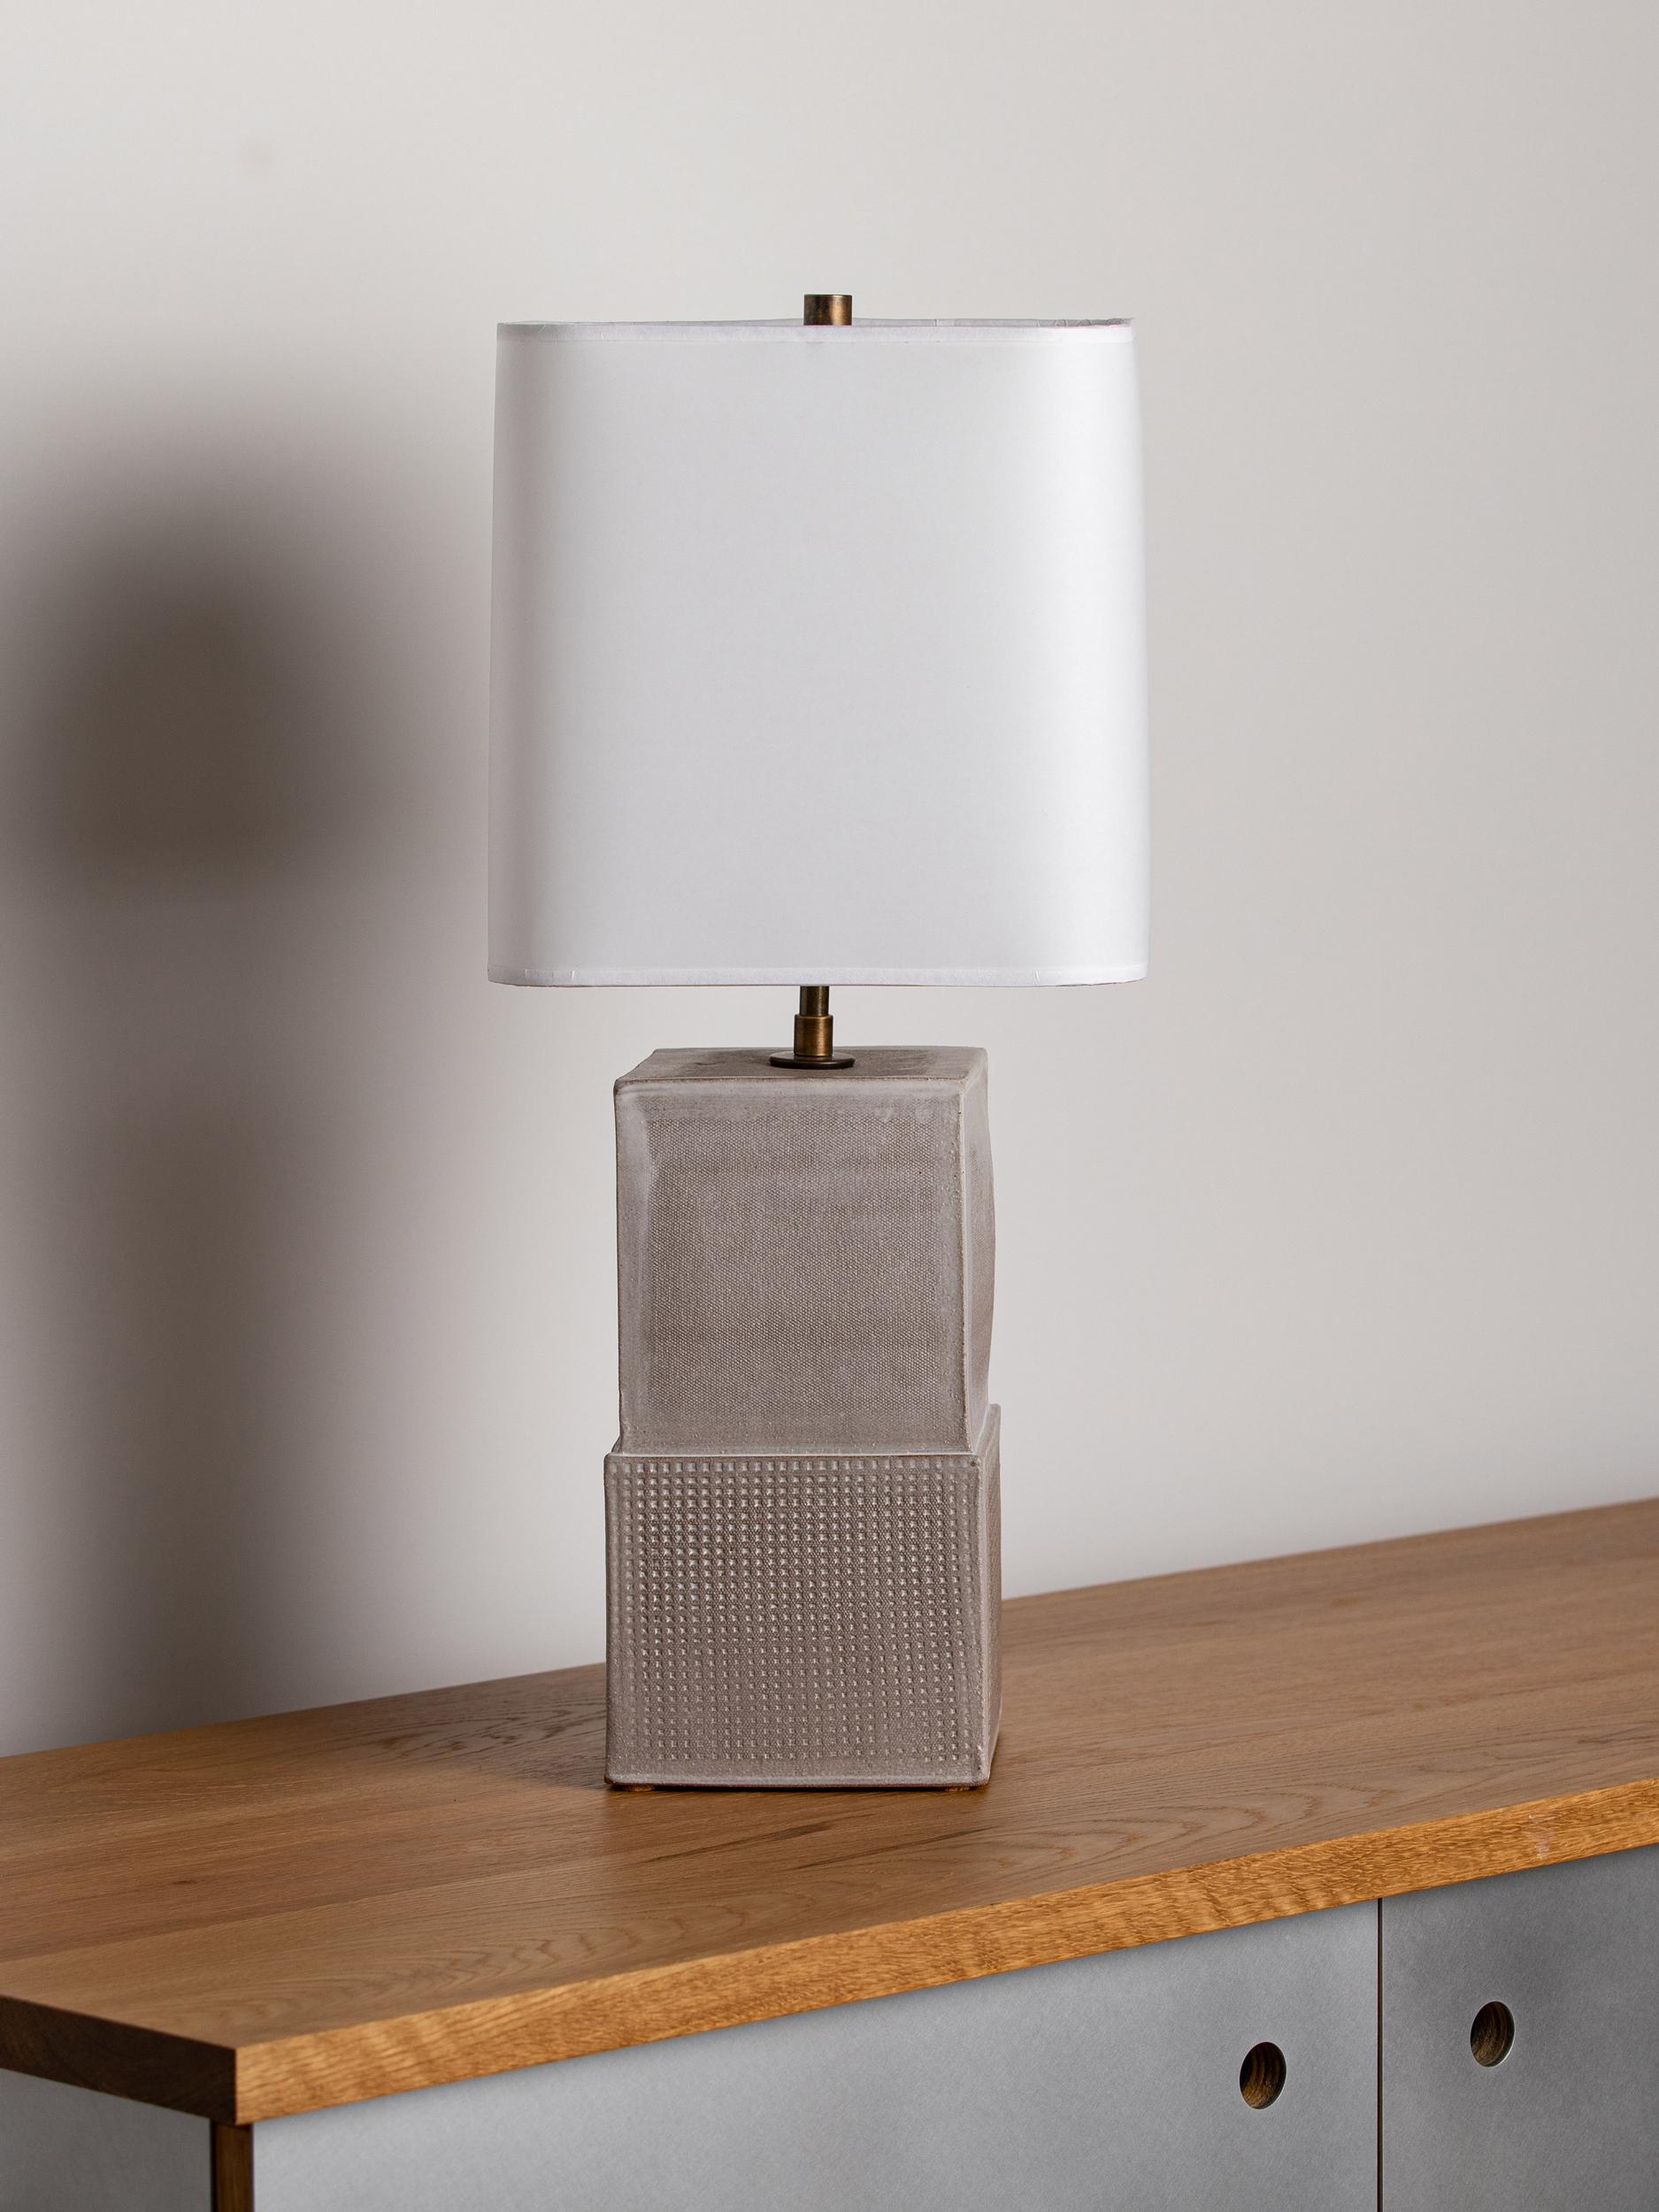 Our stoneware Block lamp is handcrafted using slab-construction techniques. The lamp’s pattern is created by rolling the surface with textured rolling pins and rods.

Finish

- Dipped glaze, pictured in chalk 
- Antique brass fittings
-